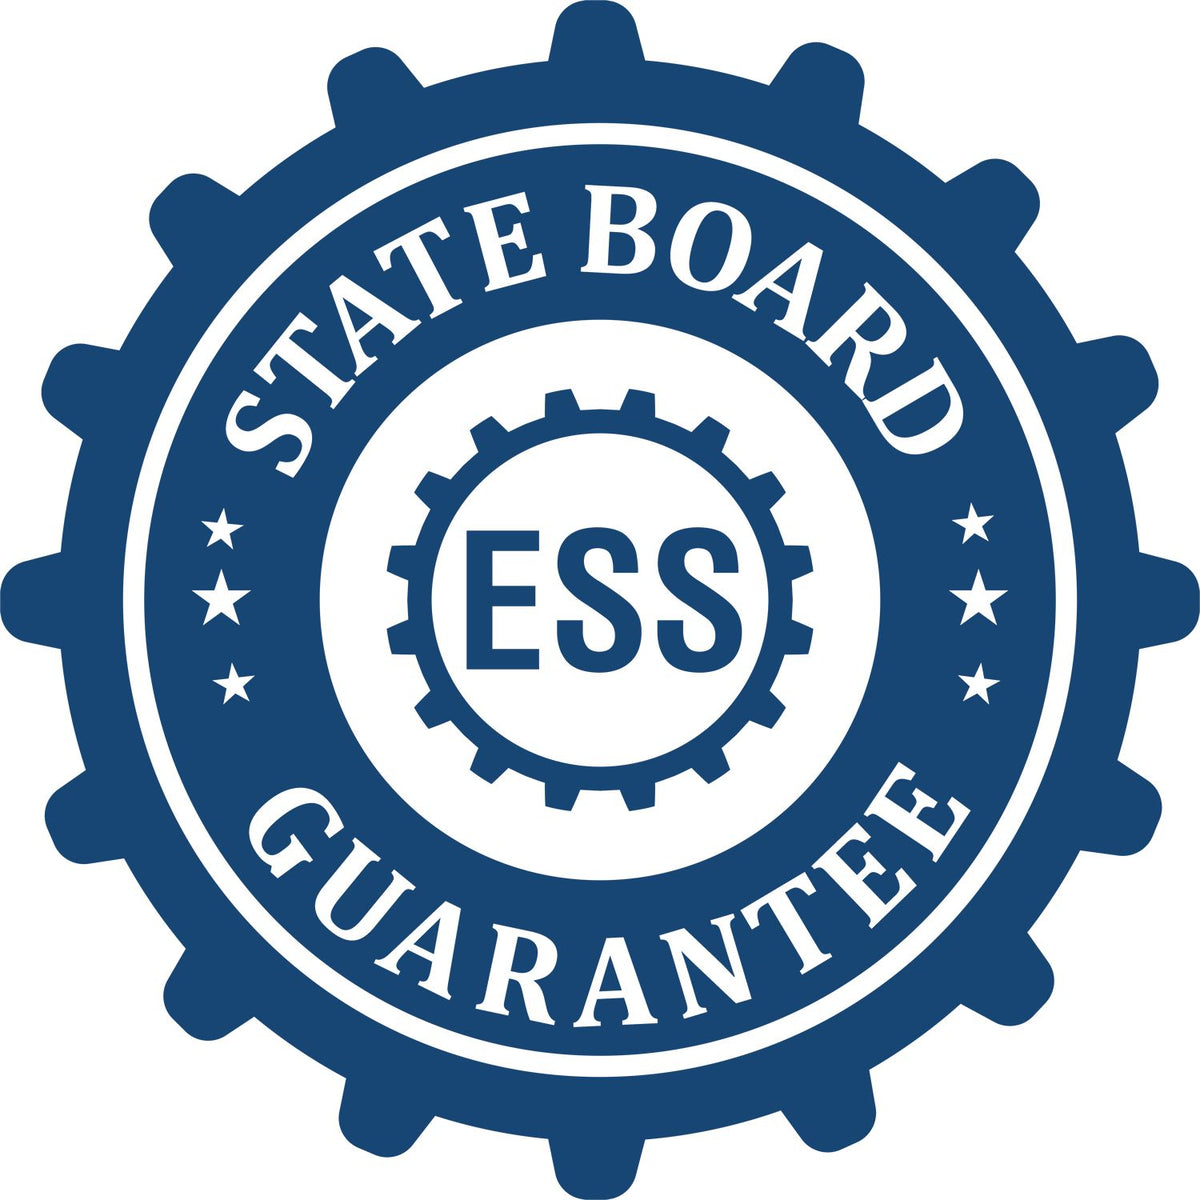 An emblem in a gear shape illustrating a state board guarantee for the State of New York Extended Long Reach Engineer Seal product.